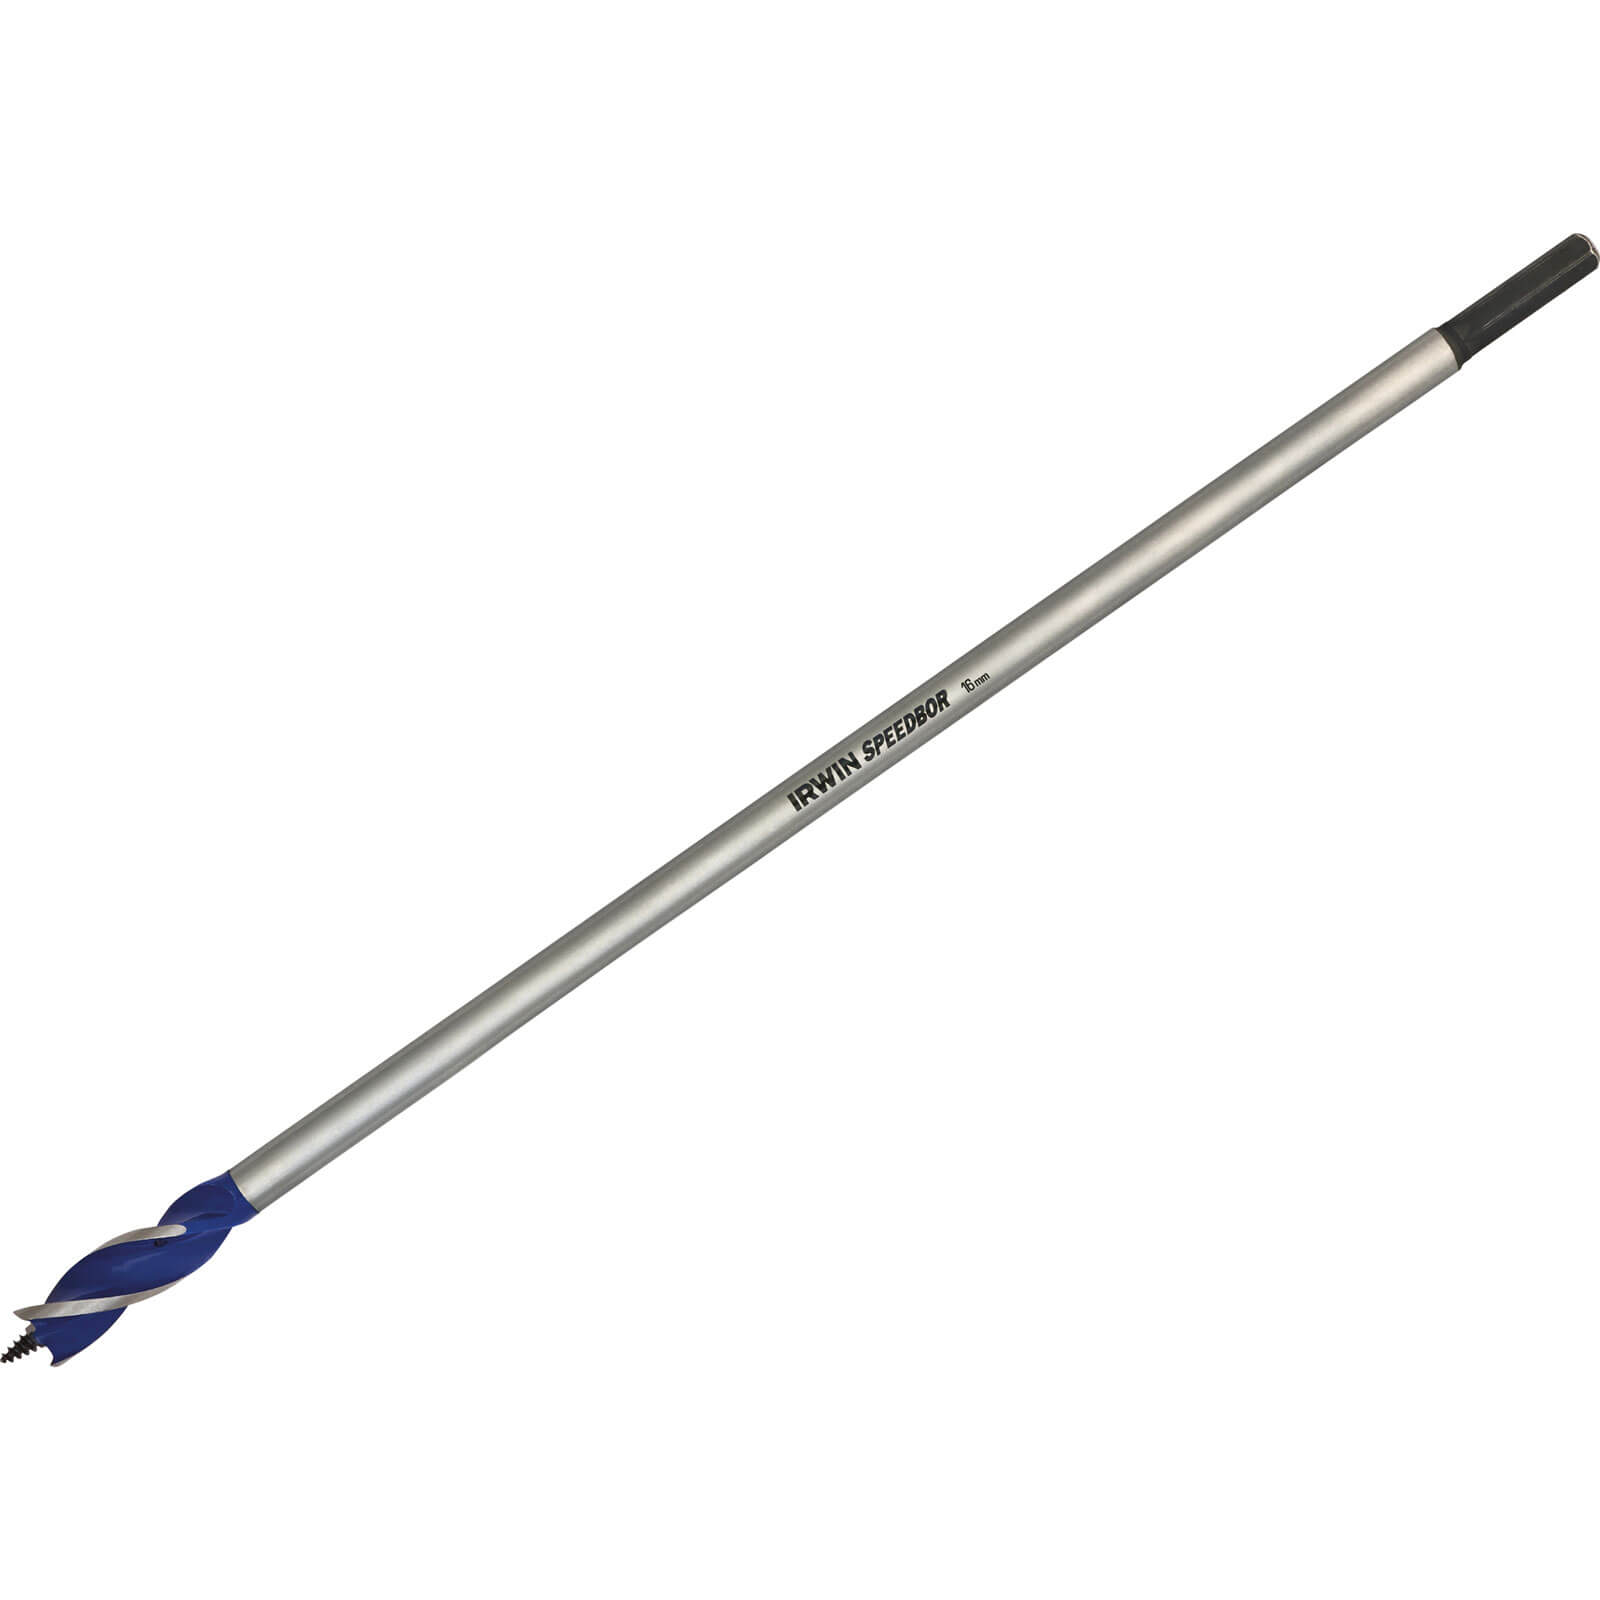 Image of Irwin 6X Blue Groove Extra Long Wood Drill Bit 14mm 400mm